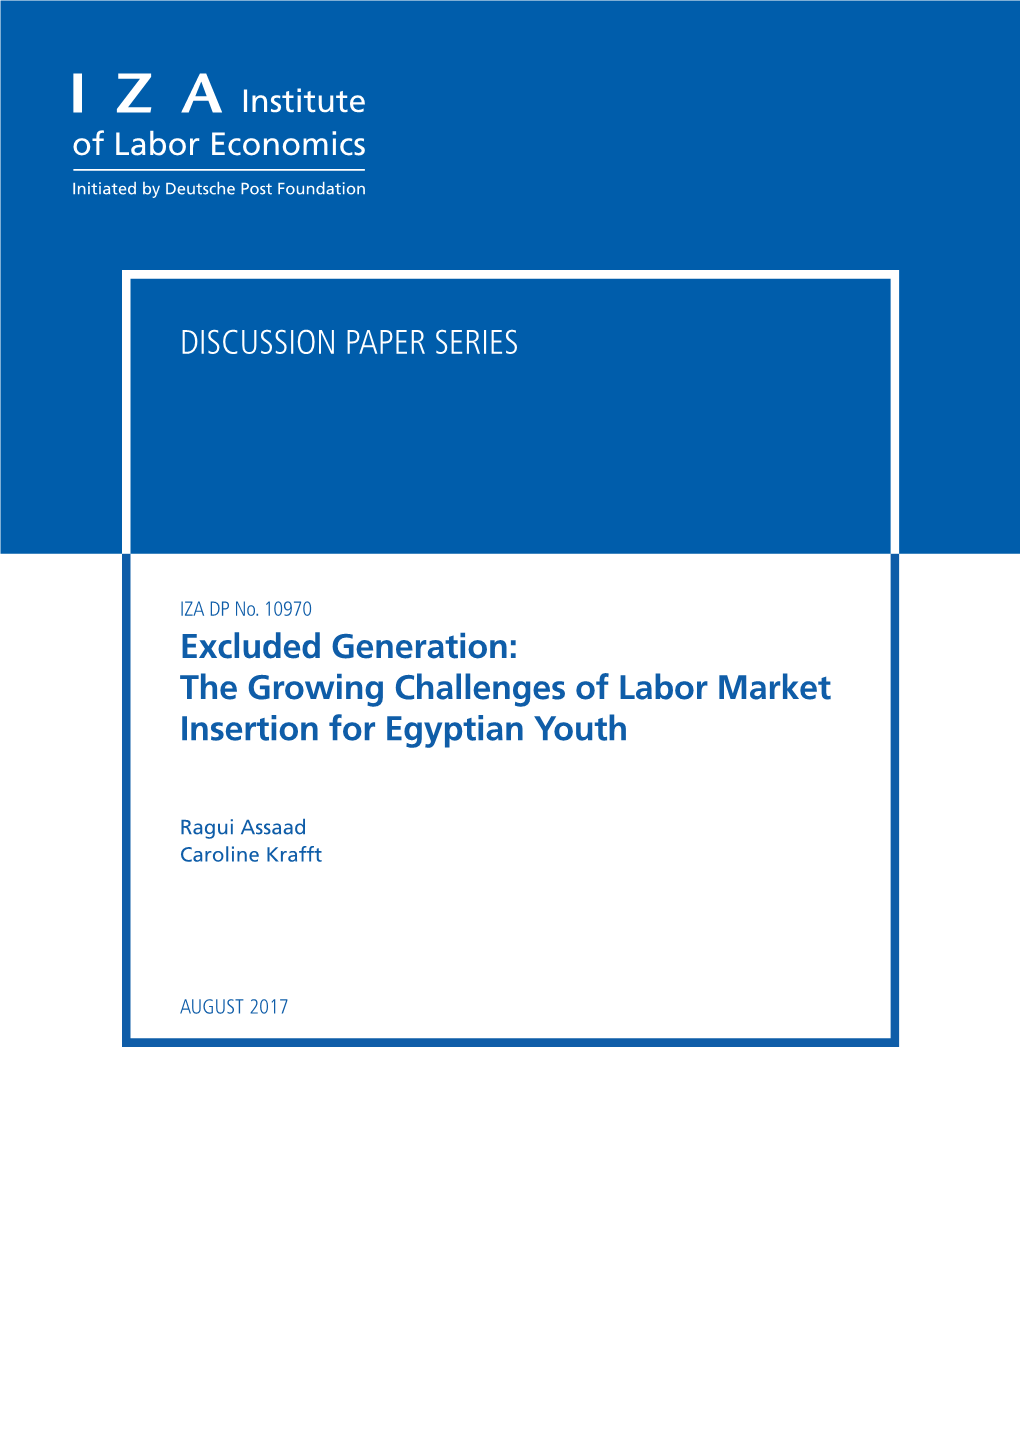 The Growing Challenges of Labor Market Insertion for Egyptian Youth